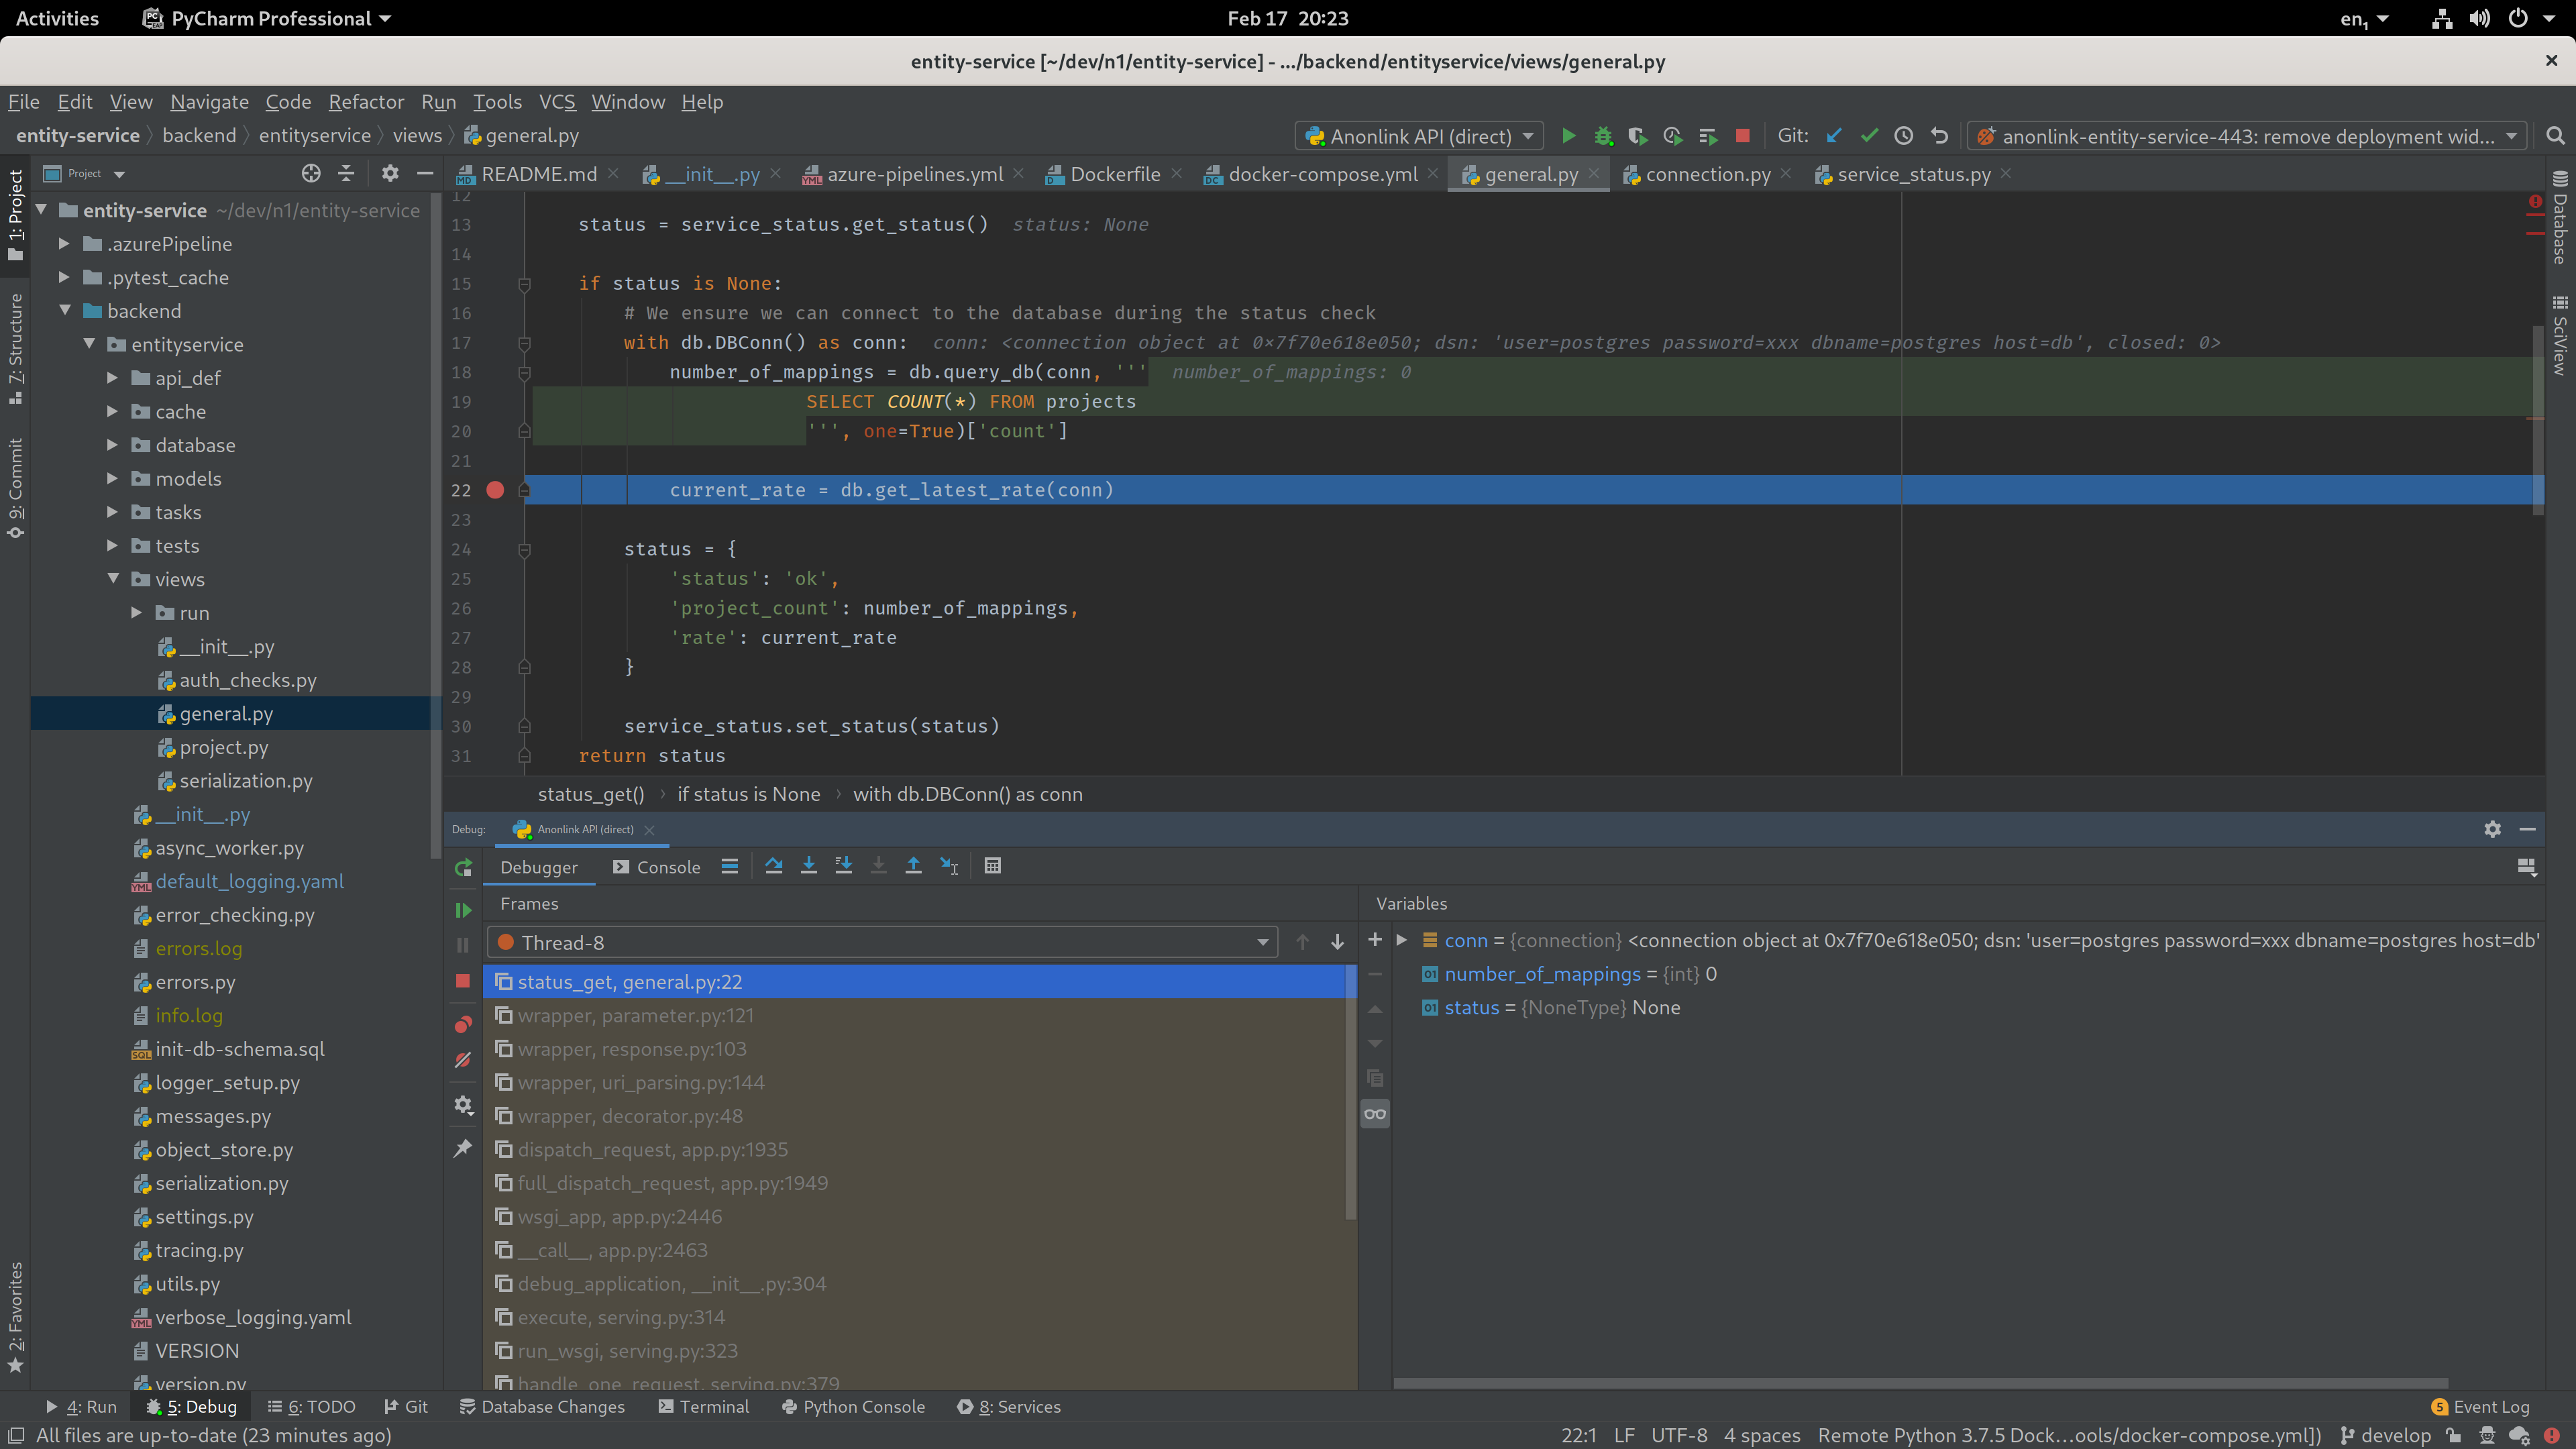 Debugging an Anonlink endpoint in PyCharm